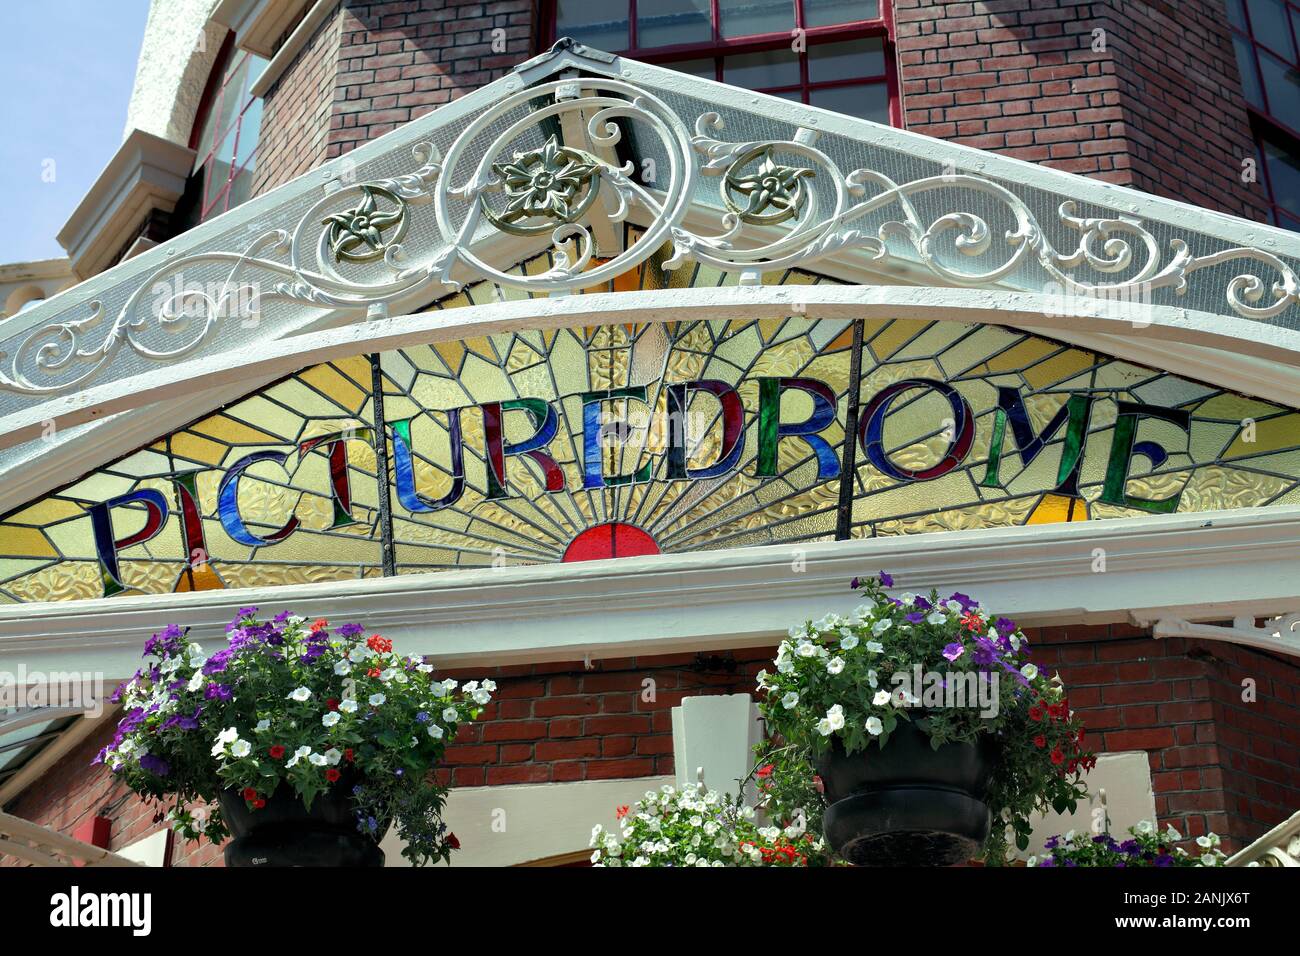 Close up of the canopy over the front entrance to the Picturedrome cinema in Bognor Regis, showing a rising sun motif behind ornate ironwork. Stock Photo